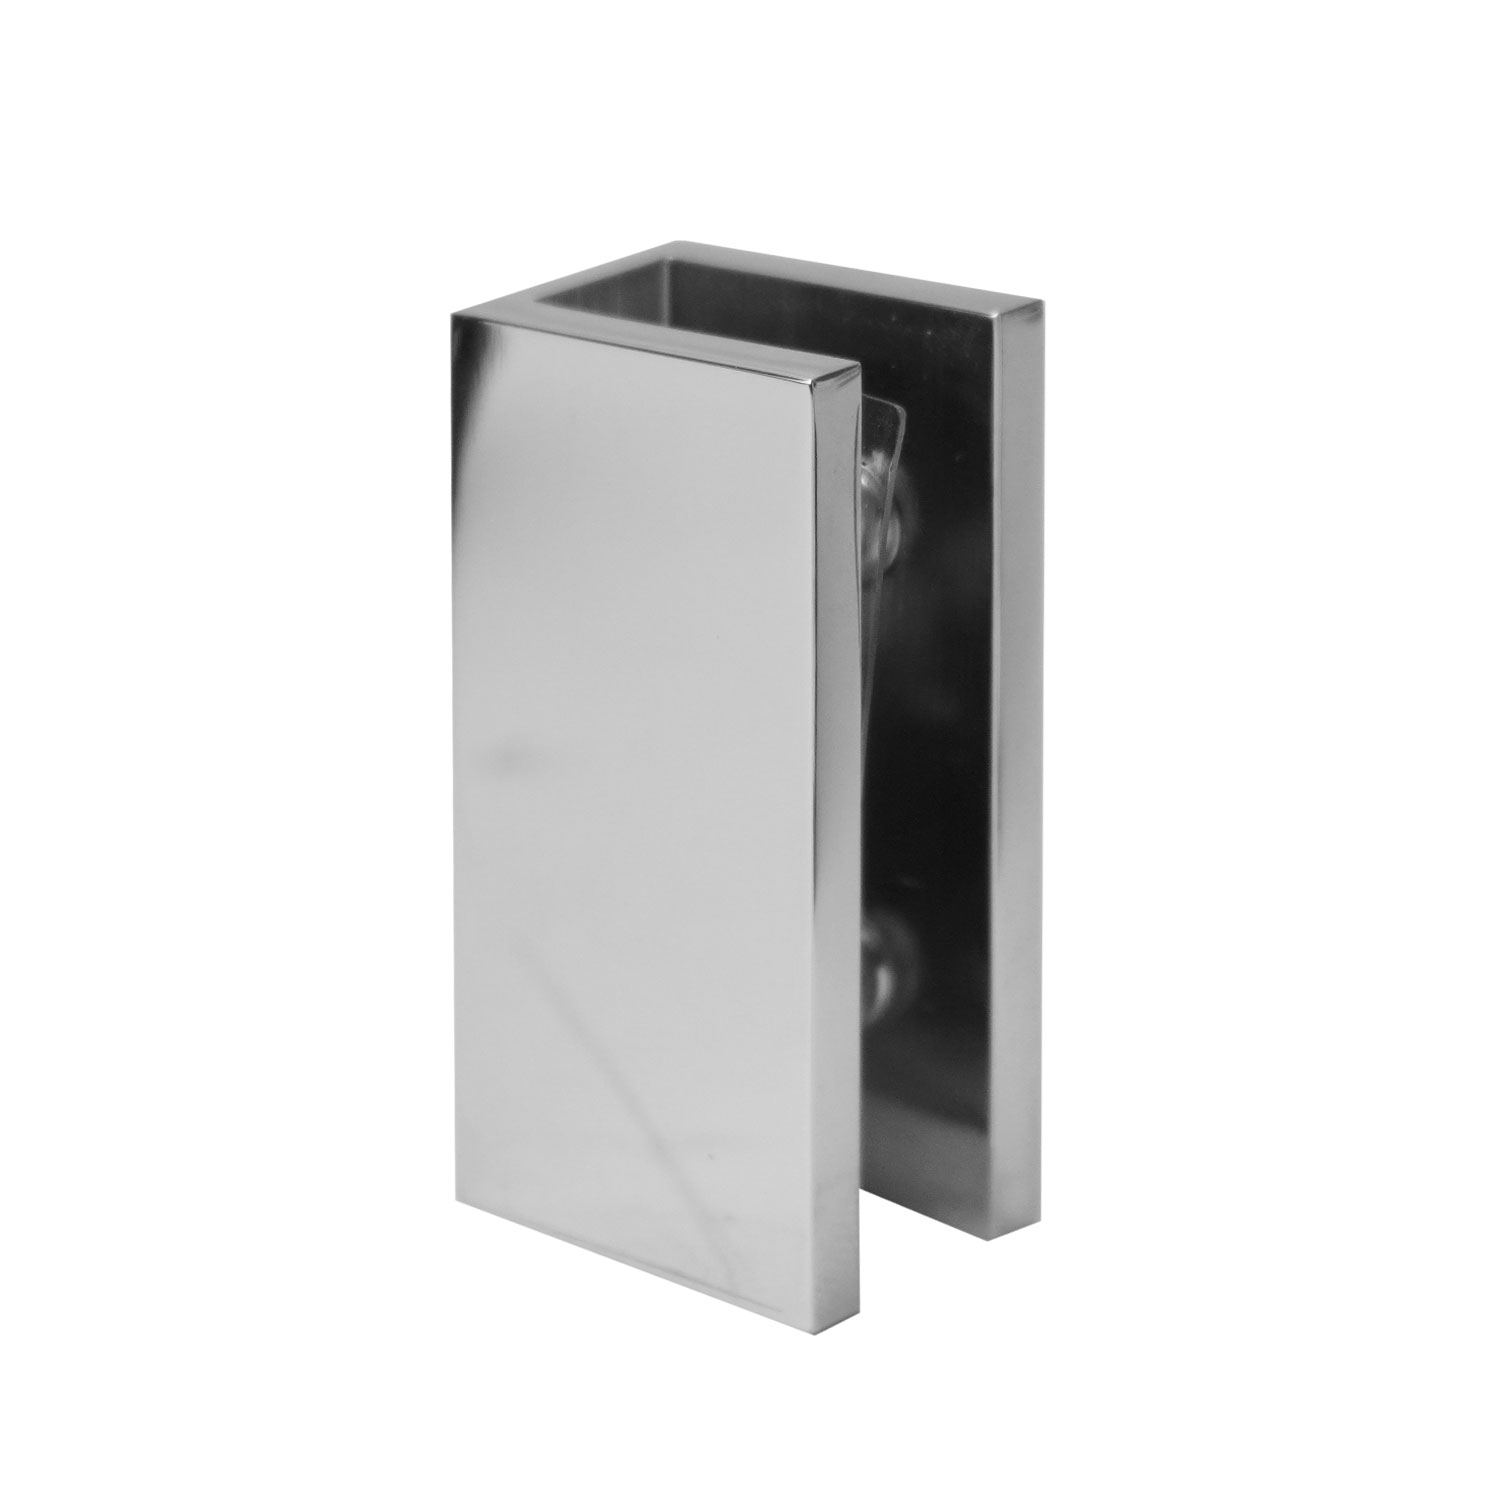  GLASS TO WALL U-CLAMP 25MM X 50MM - SQUARE SERIES (Chrome)